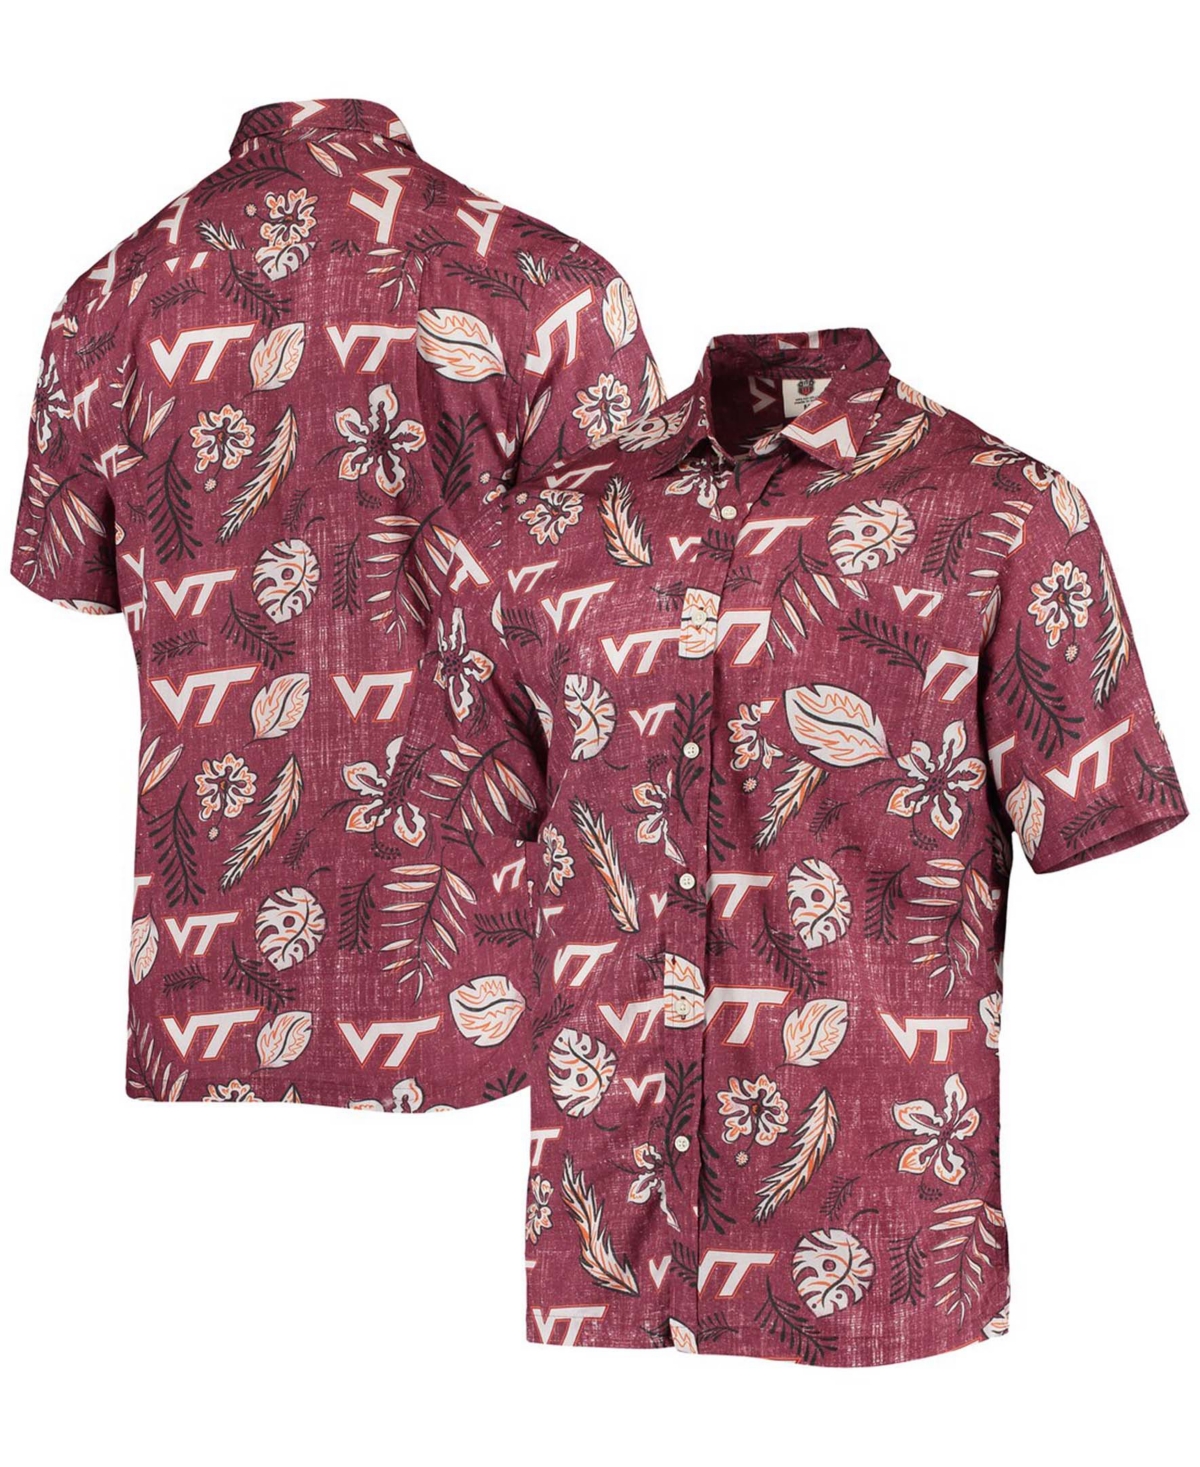 WES & WILLY MEN'S MAROON VIRGINIA TECH HOKIES VINTAGE-LIKE FLORAL BUTTON-UP SHIRT